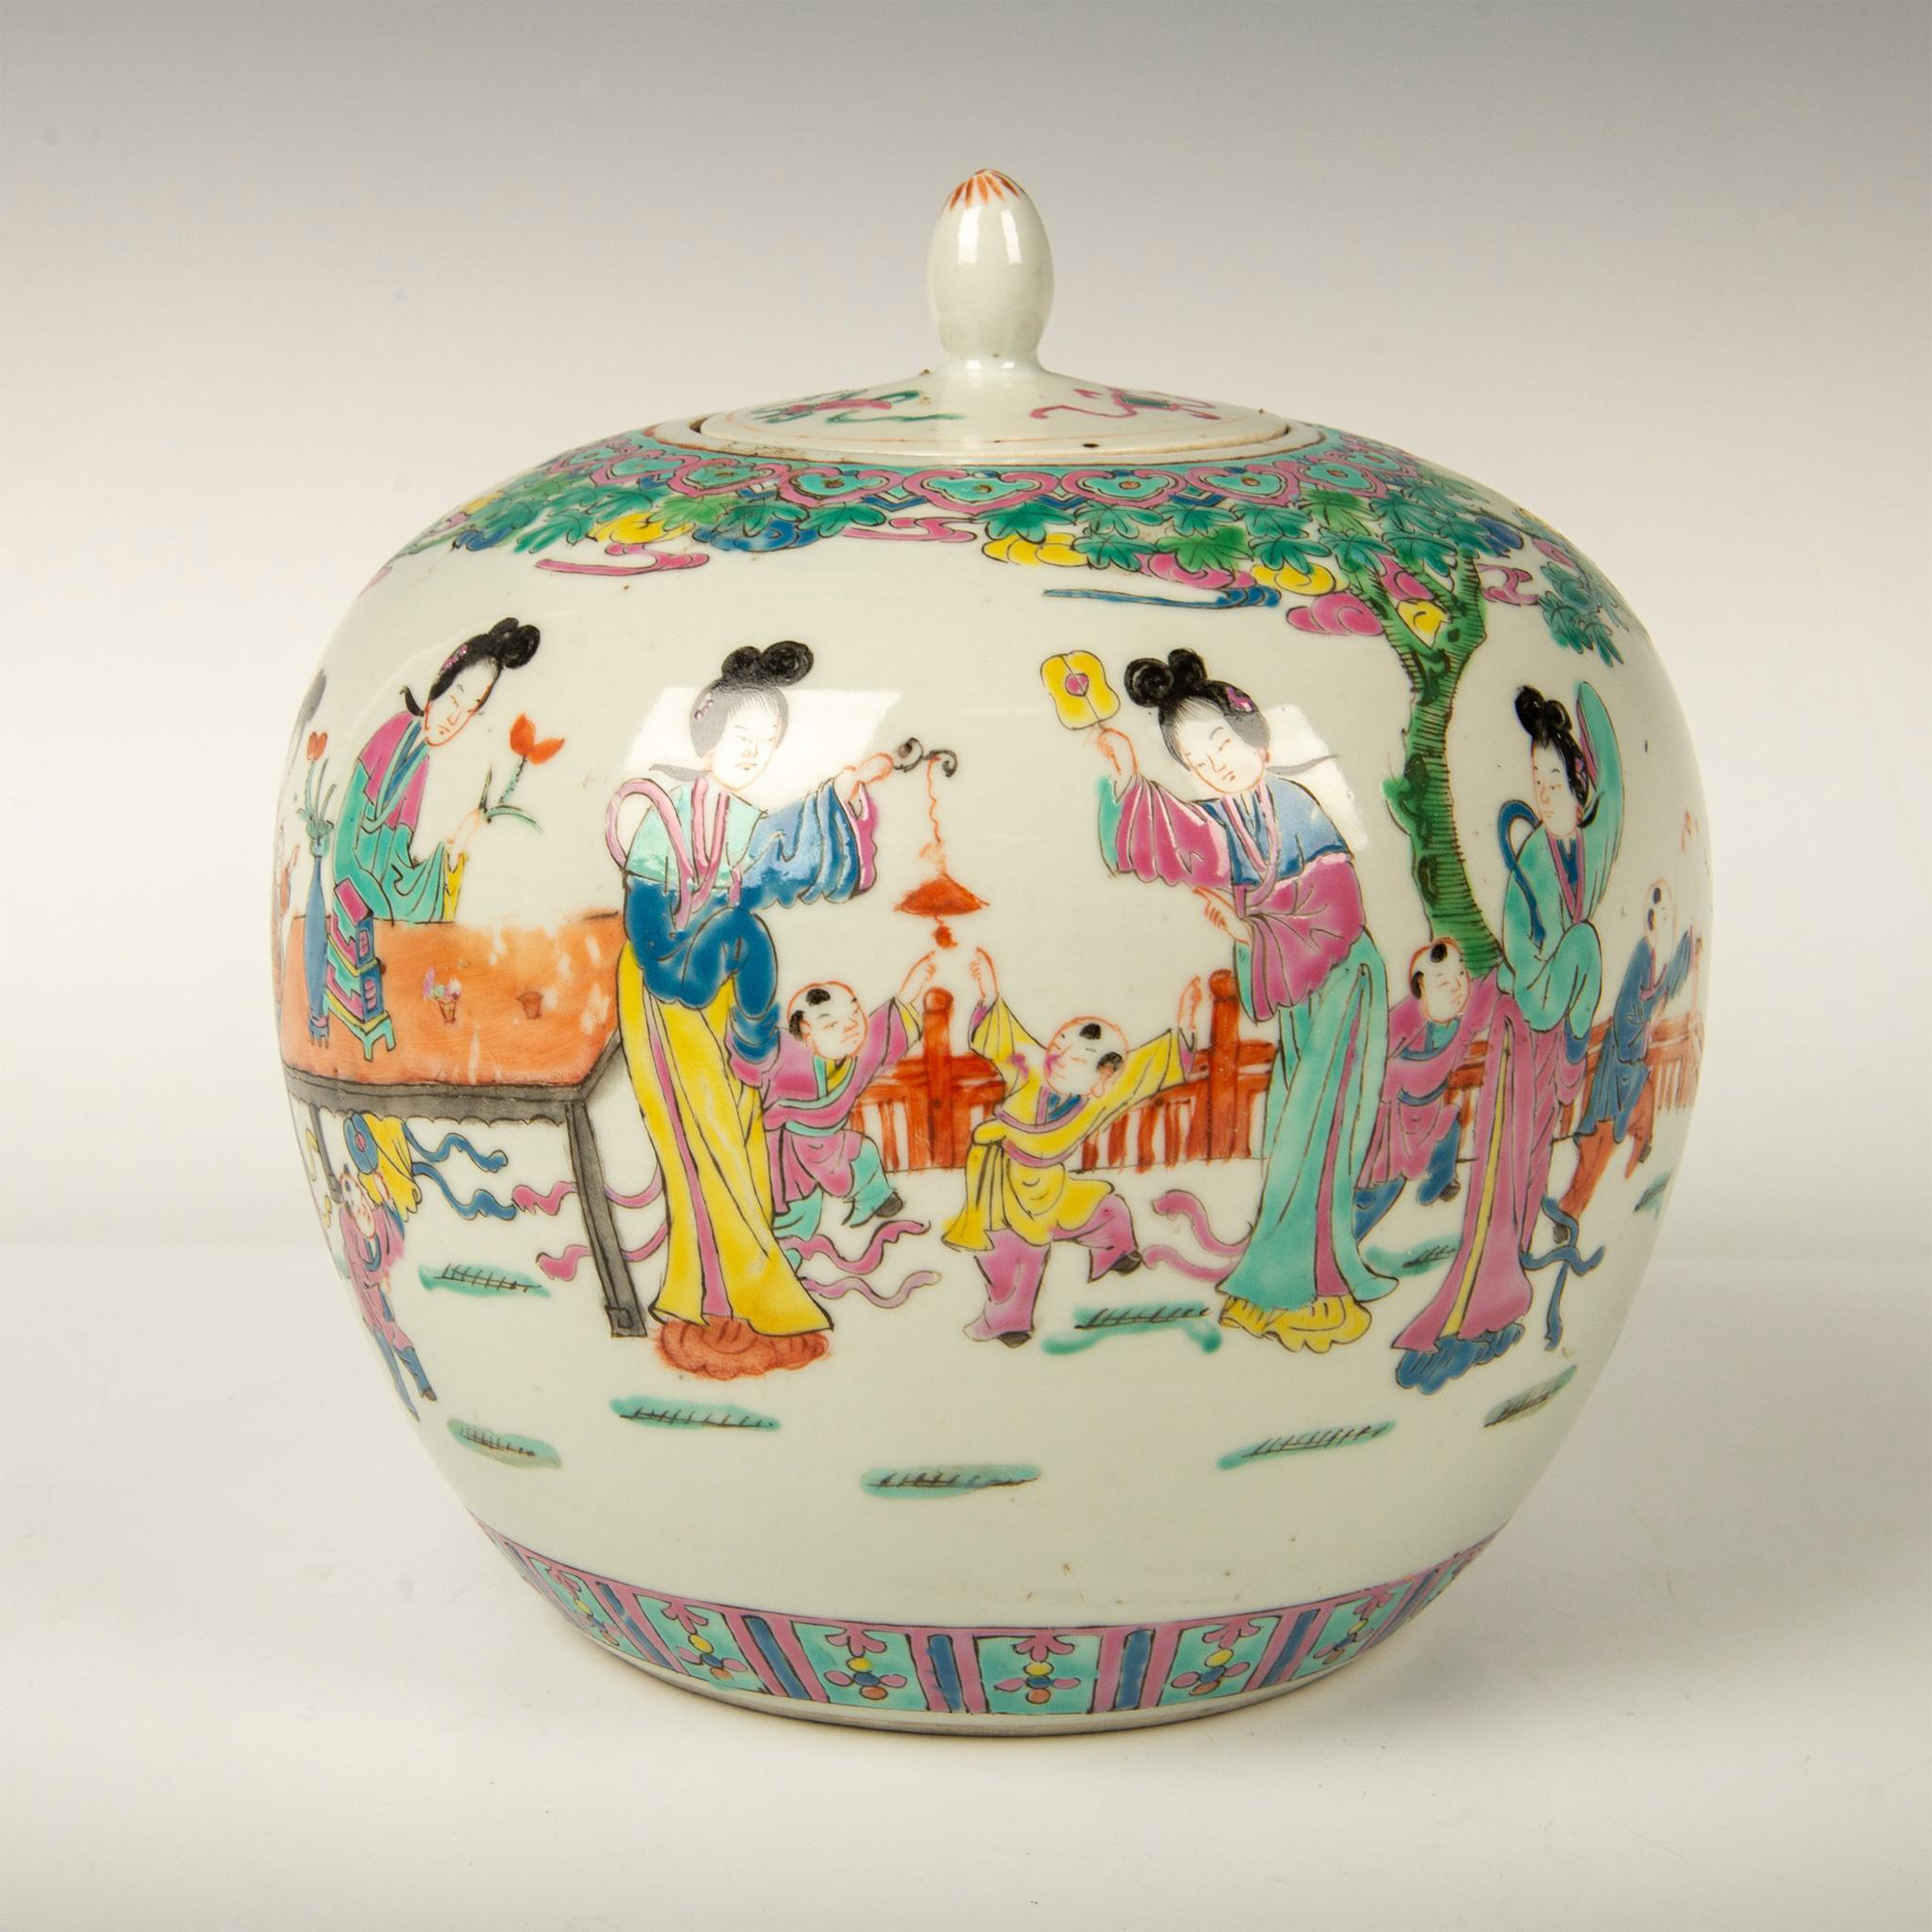 Antique Chinese Porcelain Covered Ginger Pot - Image 2 of 6